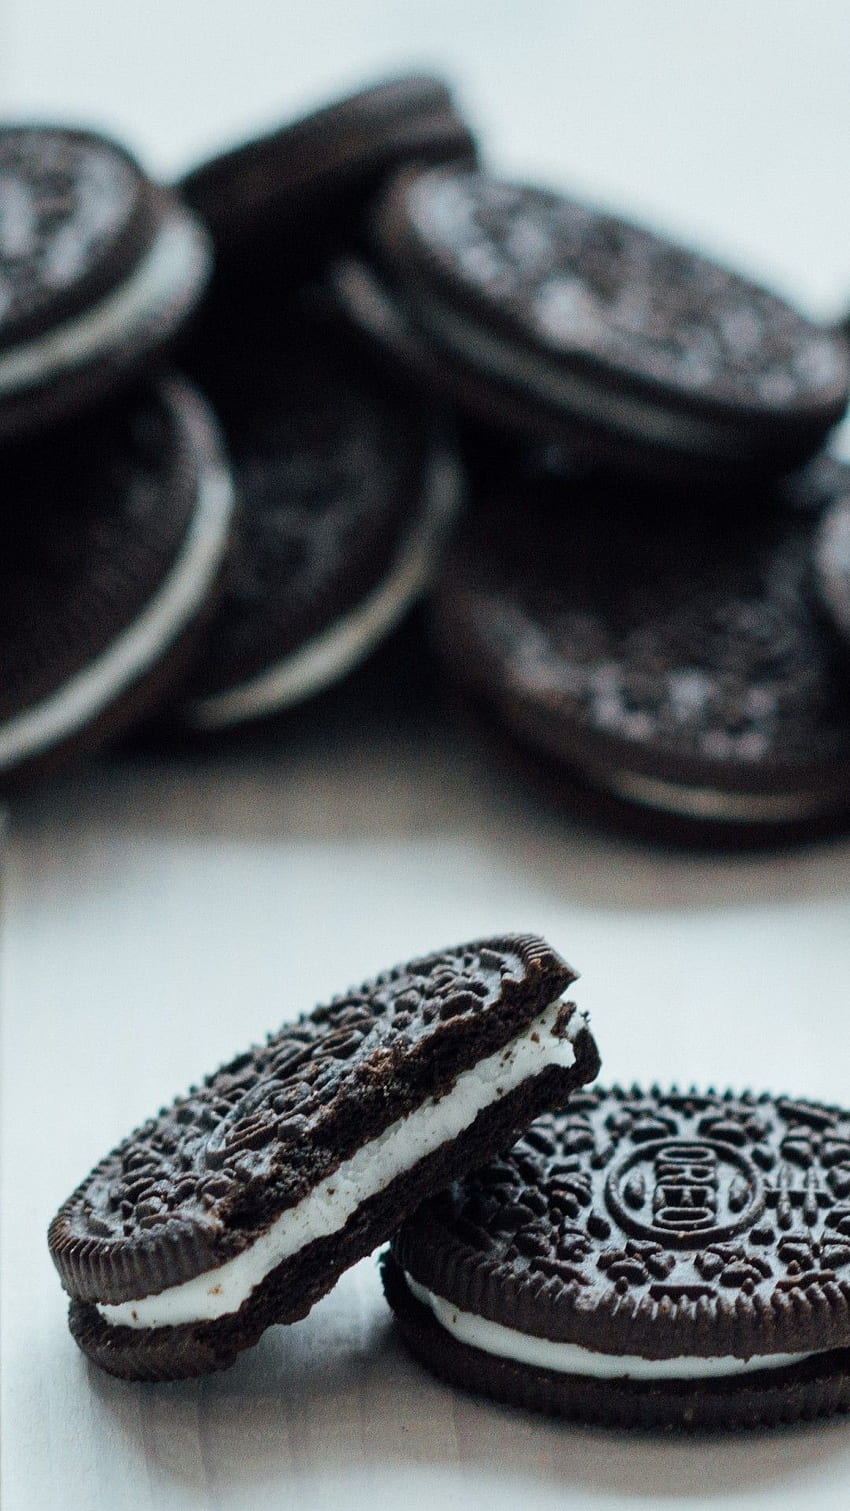 Oreo, Biscuit, Chocolate, Cream, Cookie, Dessert for iPhone 8, iPhone 7 Plus, iPhone 6+, Sony Xperia Z, HTC One - Maiden, Cookies and Cream HD phone wallpaper